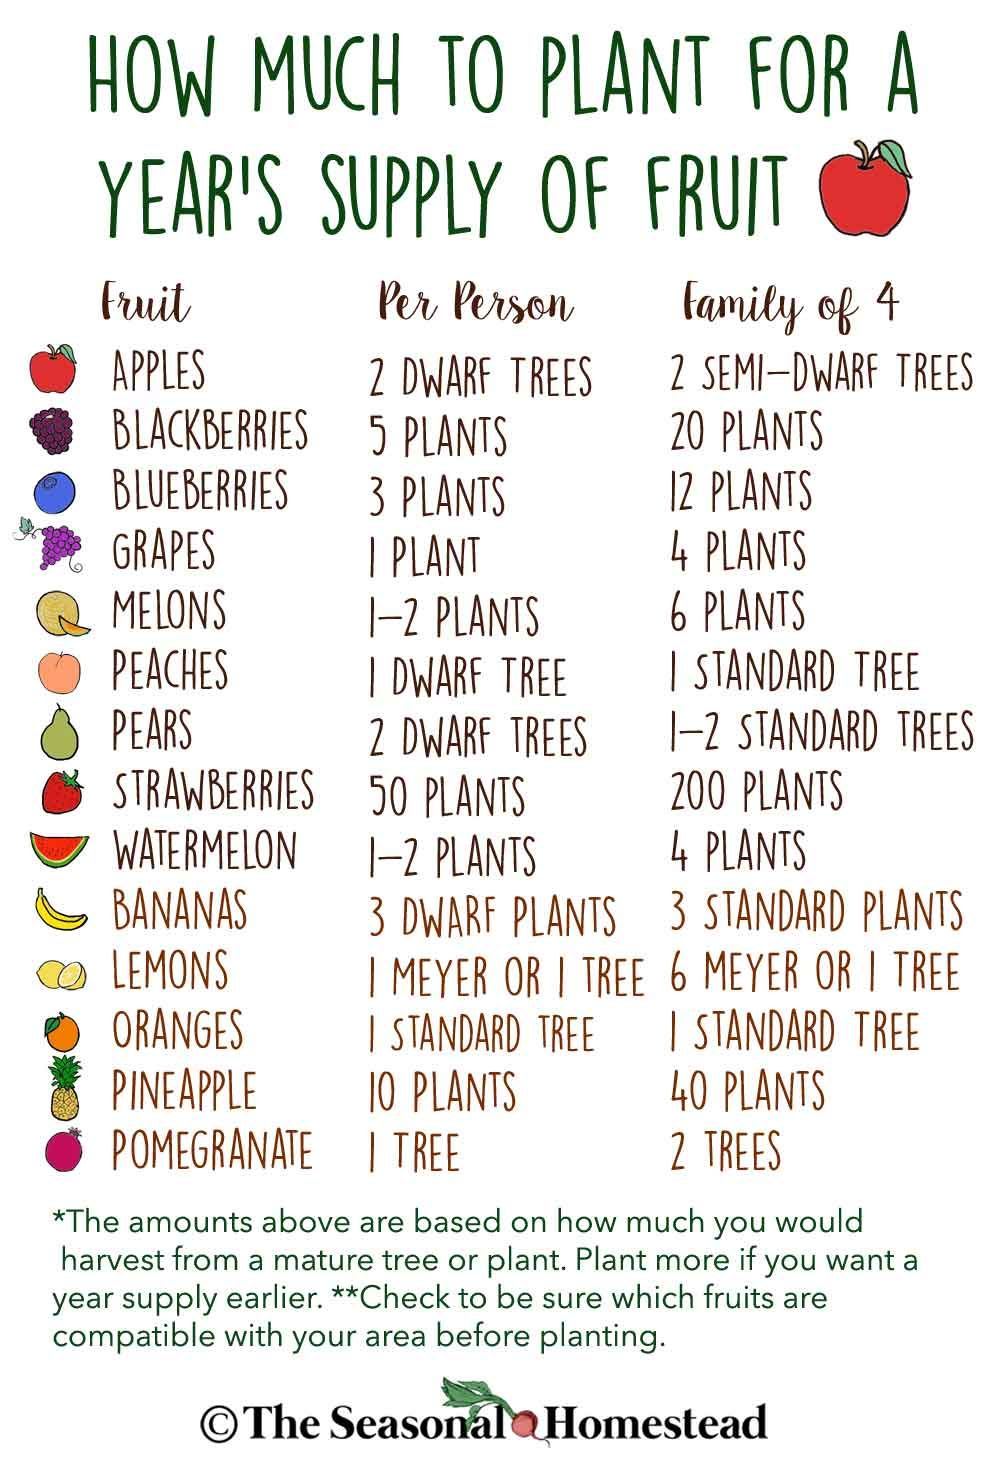 How Much to Plant for a Year's Supply of Fruit. Self-Sufficiency for a Year's Supply of Food.